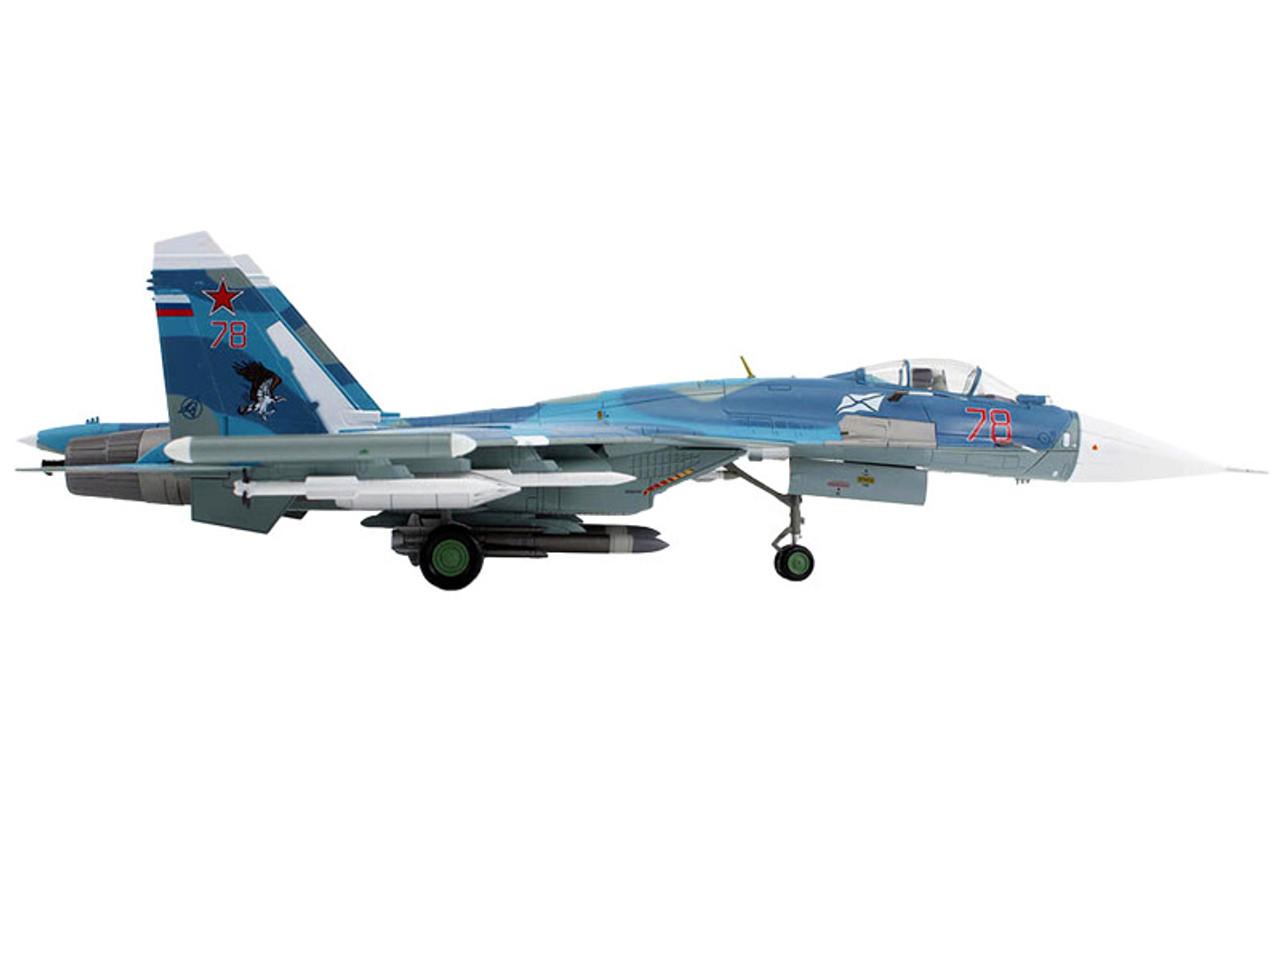 Sukhoi Su-33 Flanker D Fighter Aircraft "1st Aviation Squadron 279th Shipborne Fighter Aviation Regiment" (2016) Russian Navy "Air Power Series" 1/72 Diecast Model by Hobby Master